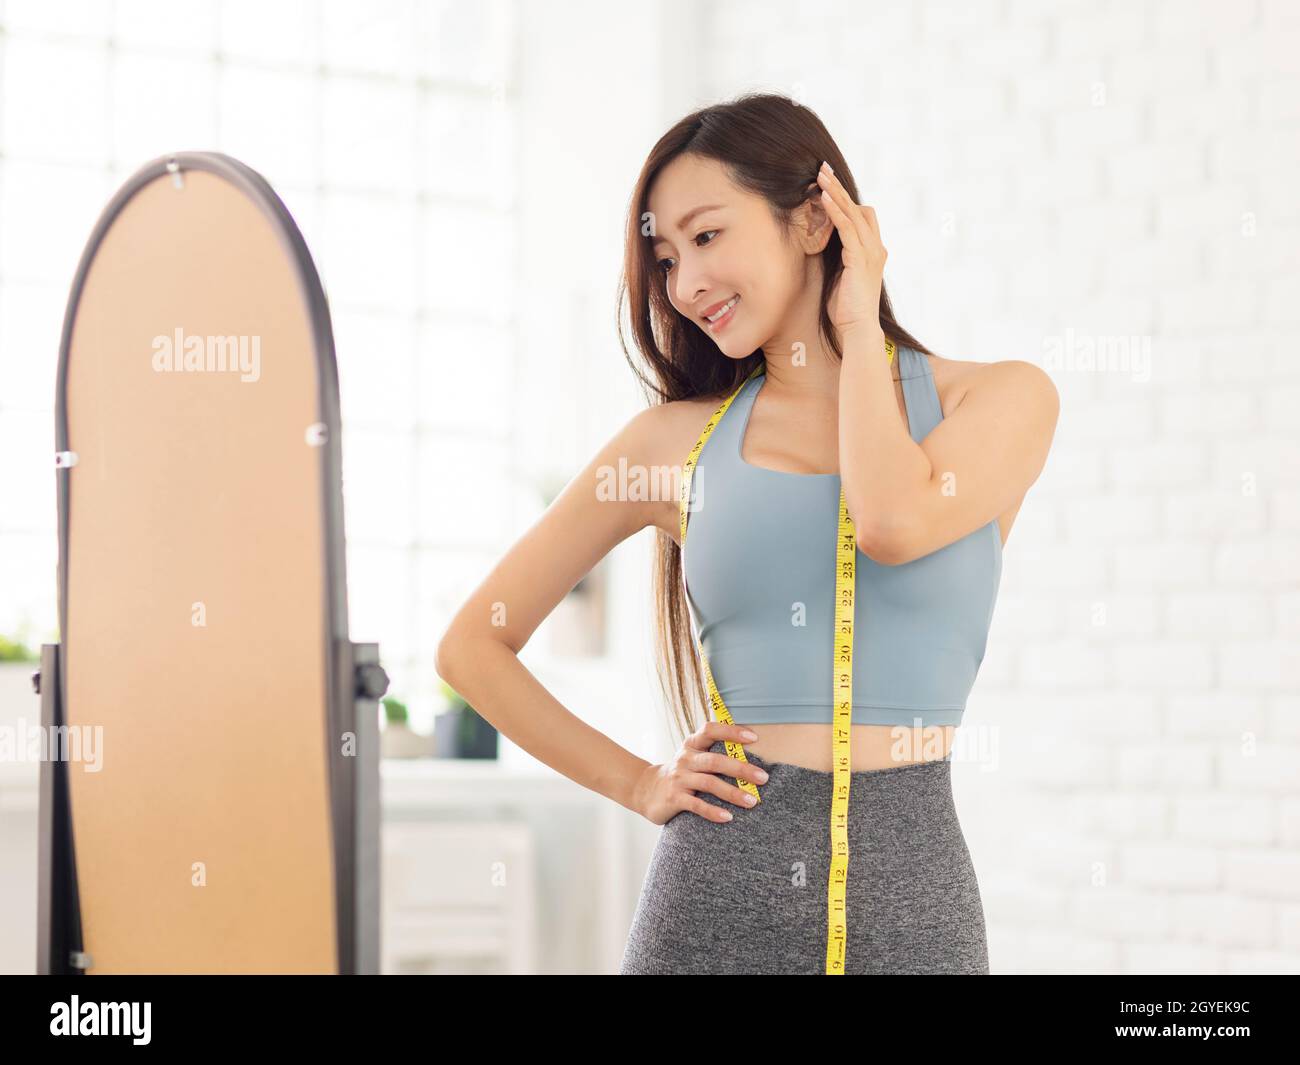 Asian Women and Their Body Shape with Waist Measurements Stock Image -  Image of female, fitness: 208857441